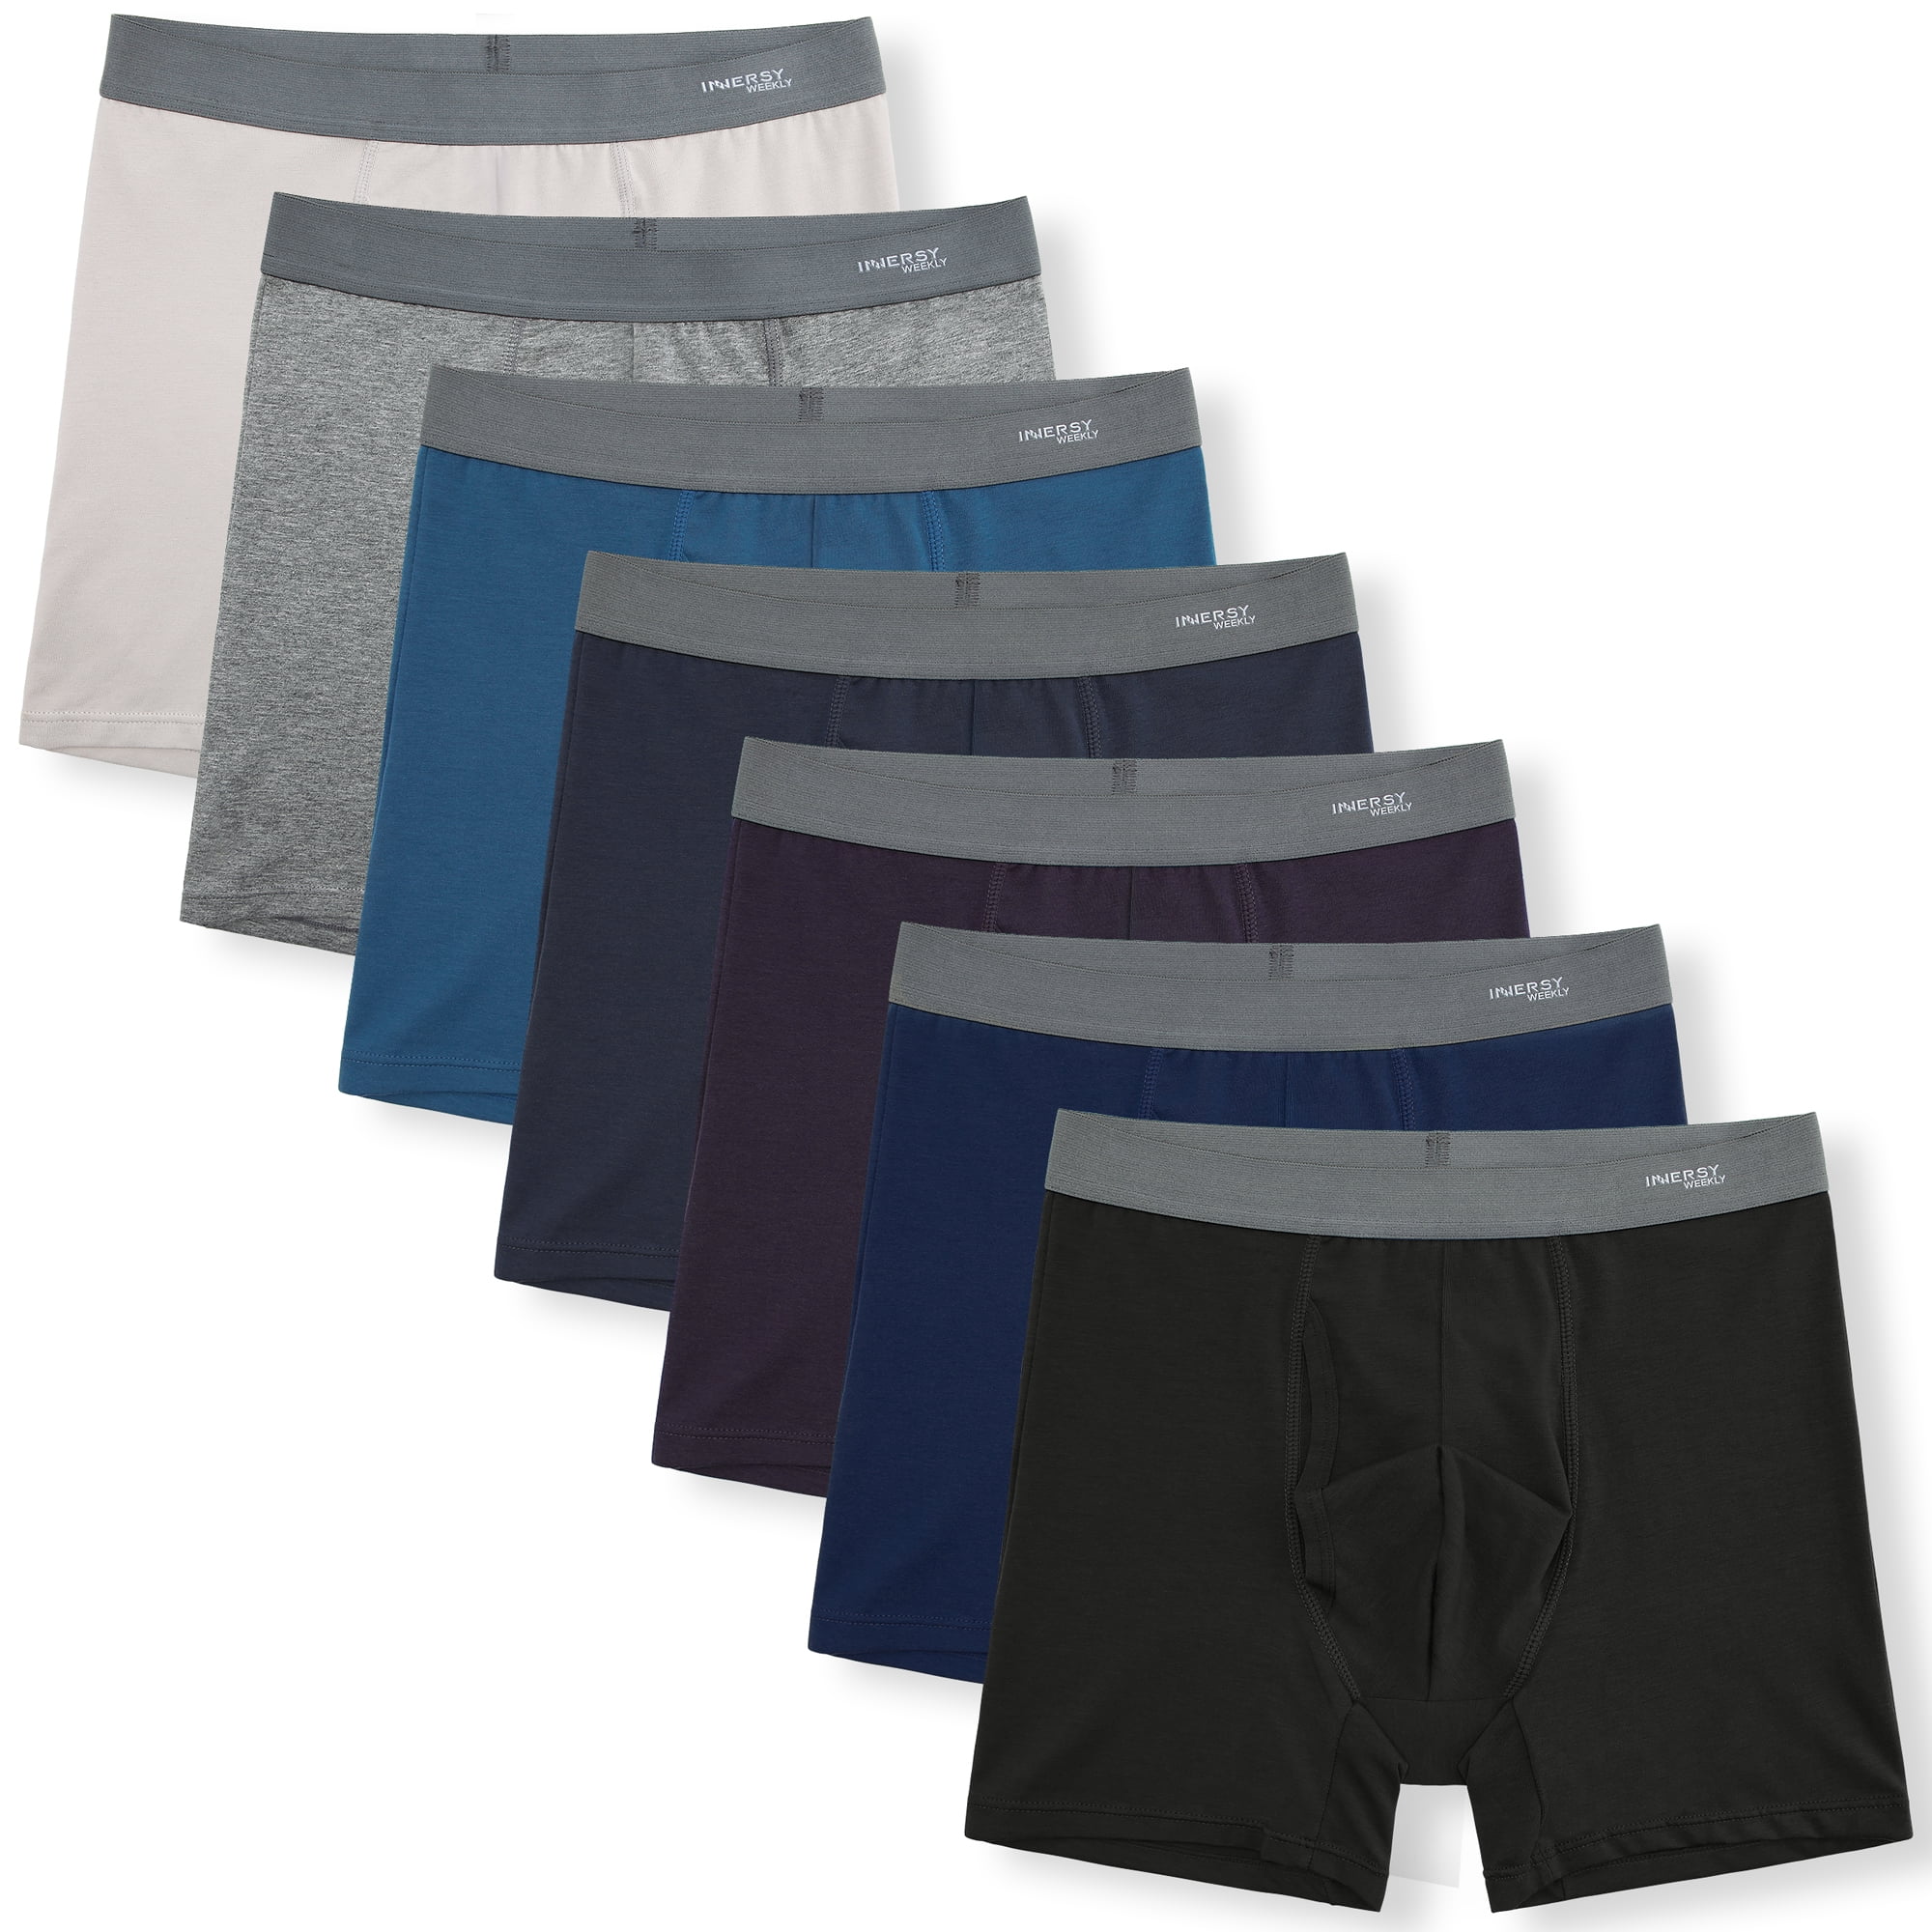 INNERSY Boxer Briefs with Open Fly Cotton Stretch Underwear for Men 7-Pack  (Gradient Basics, XX-Large) 